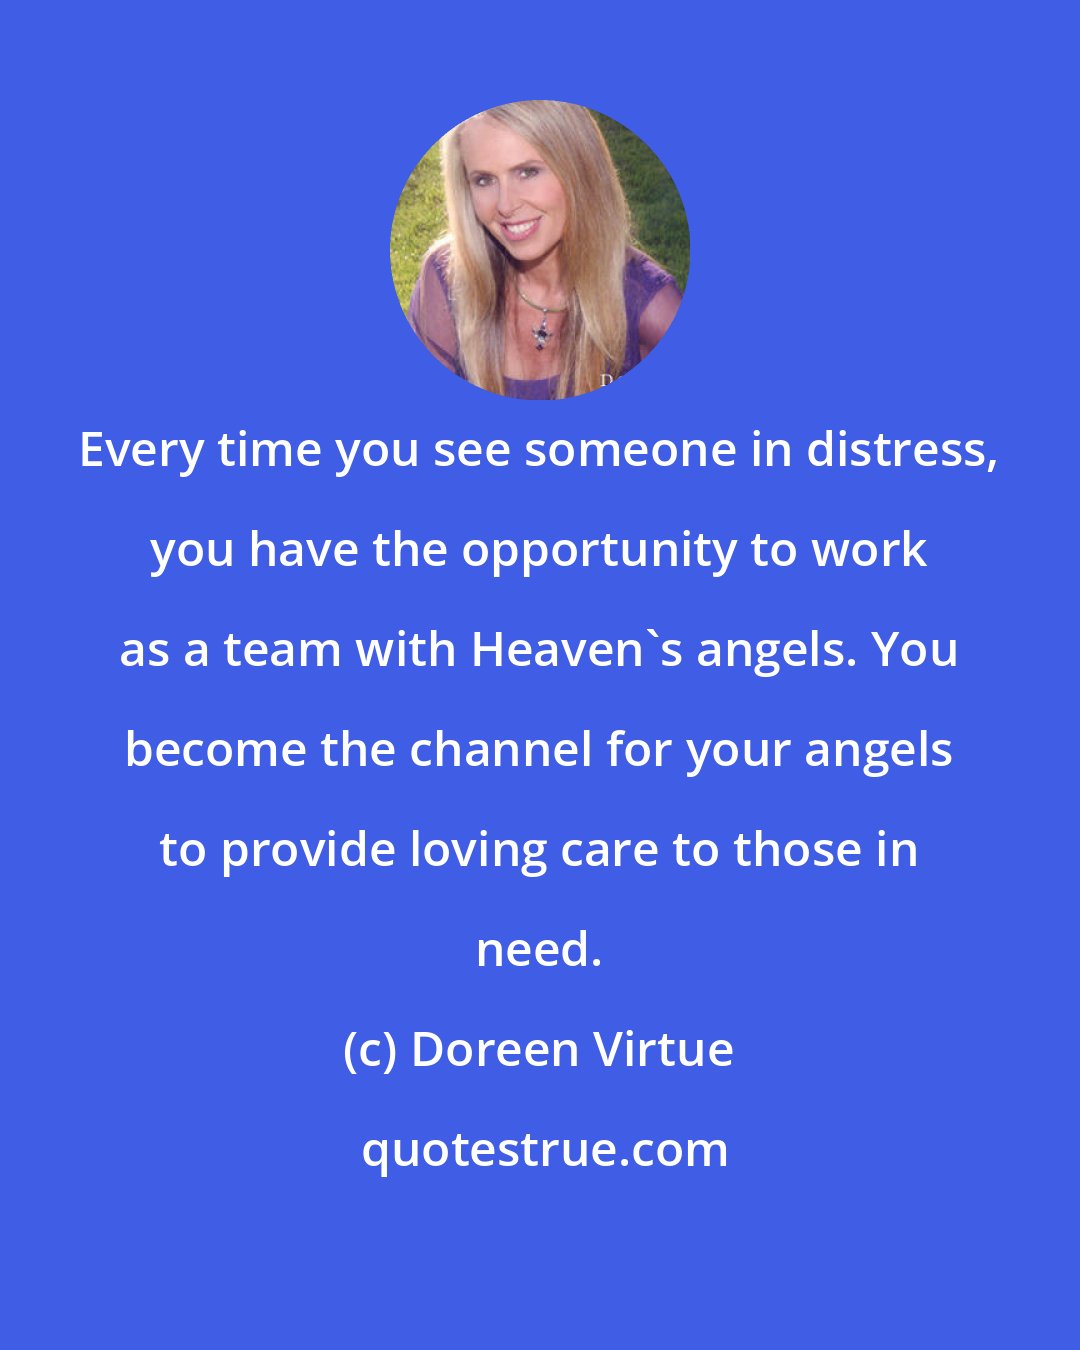 Doreen Virtue: Every time you see someone in distress, you have the opportunity to work as a team with Heaven's angels. You become the channel for your angels to provide loving care to those in need.